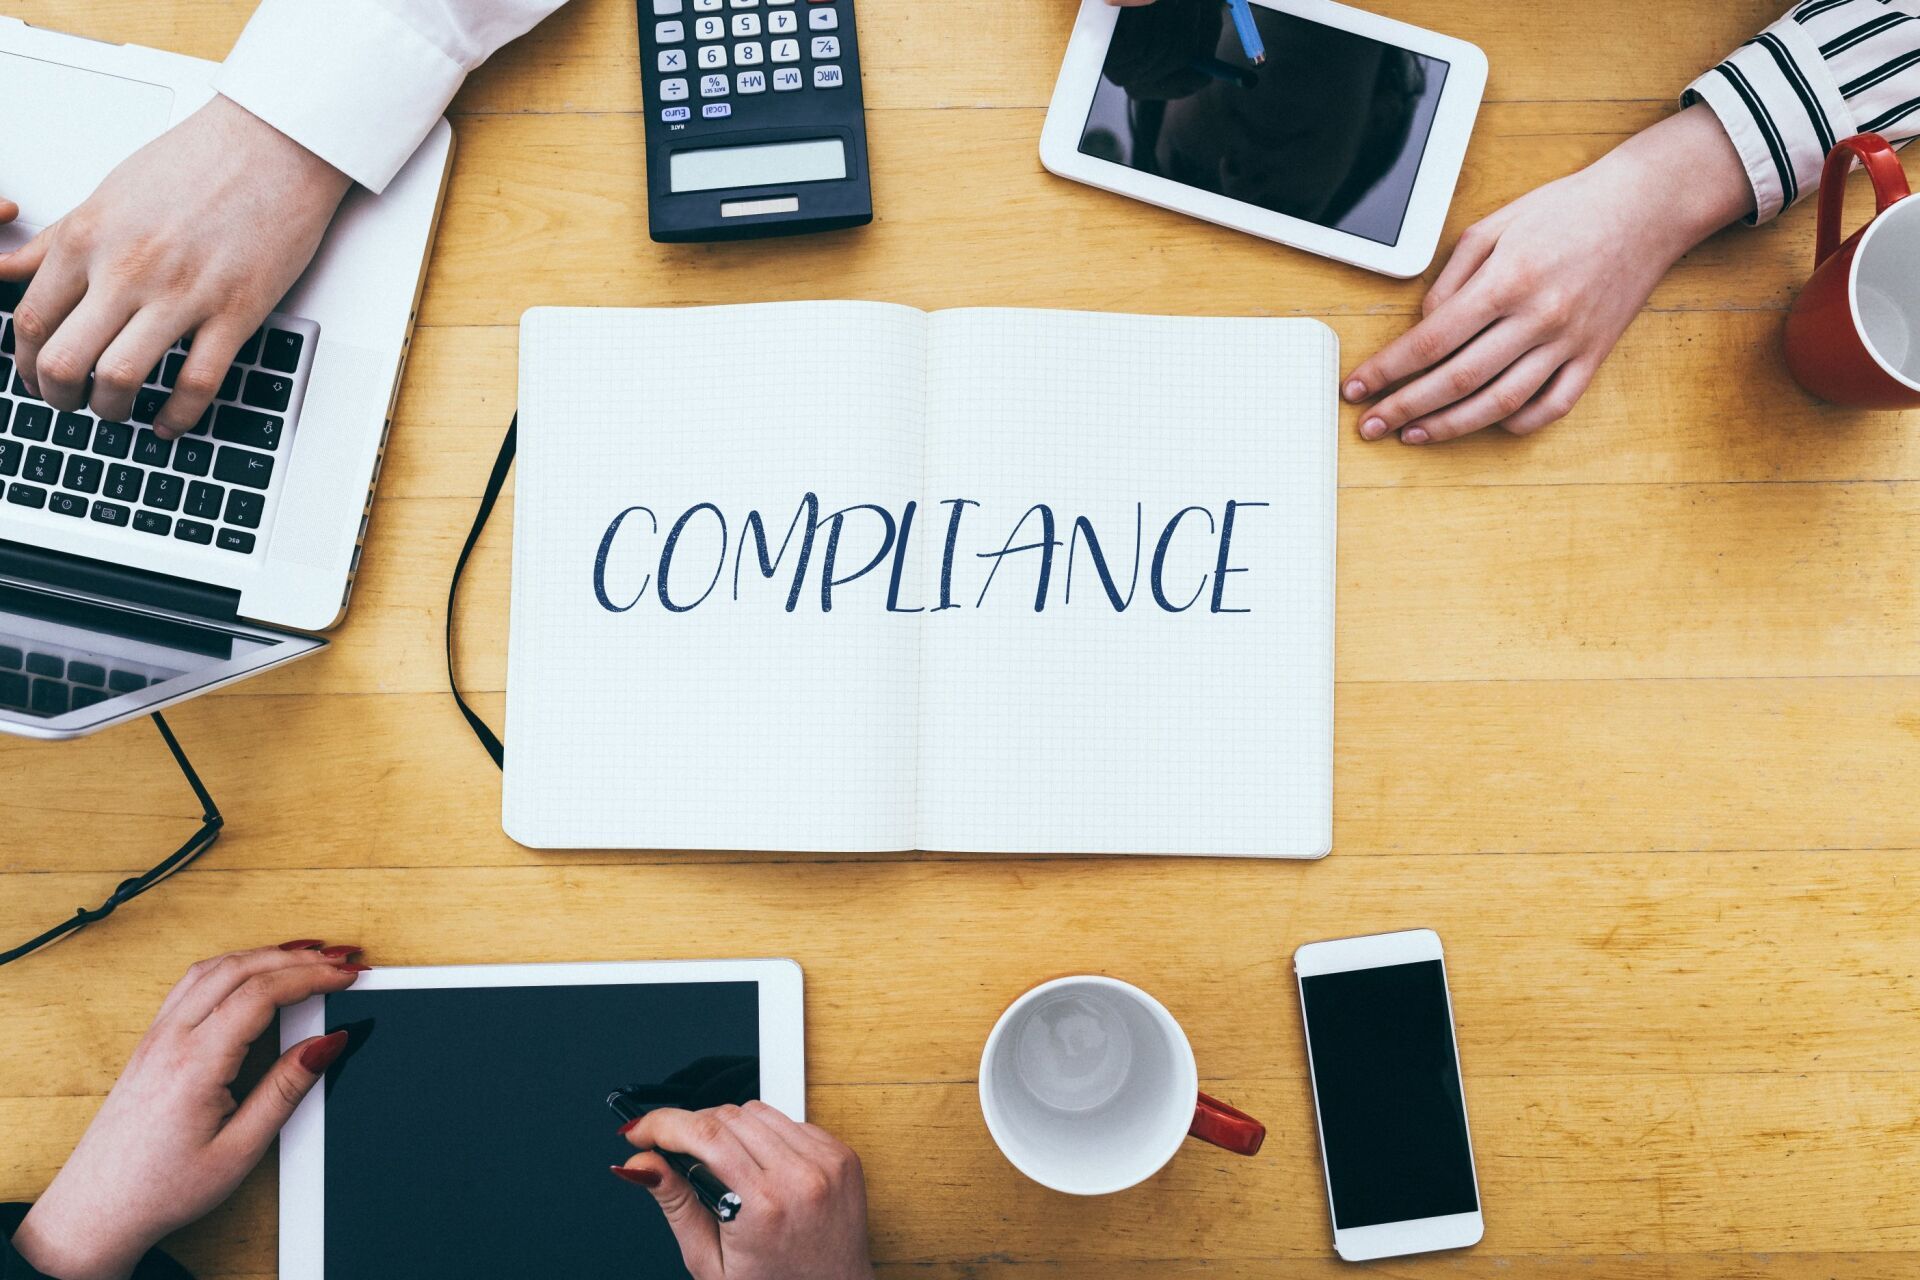 Background Screening Compliance: What Does That Mean For Your Business?